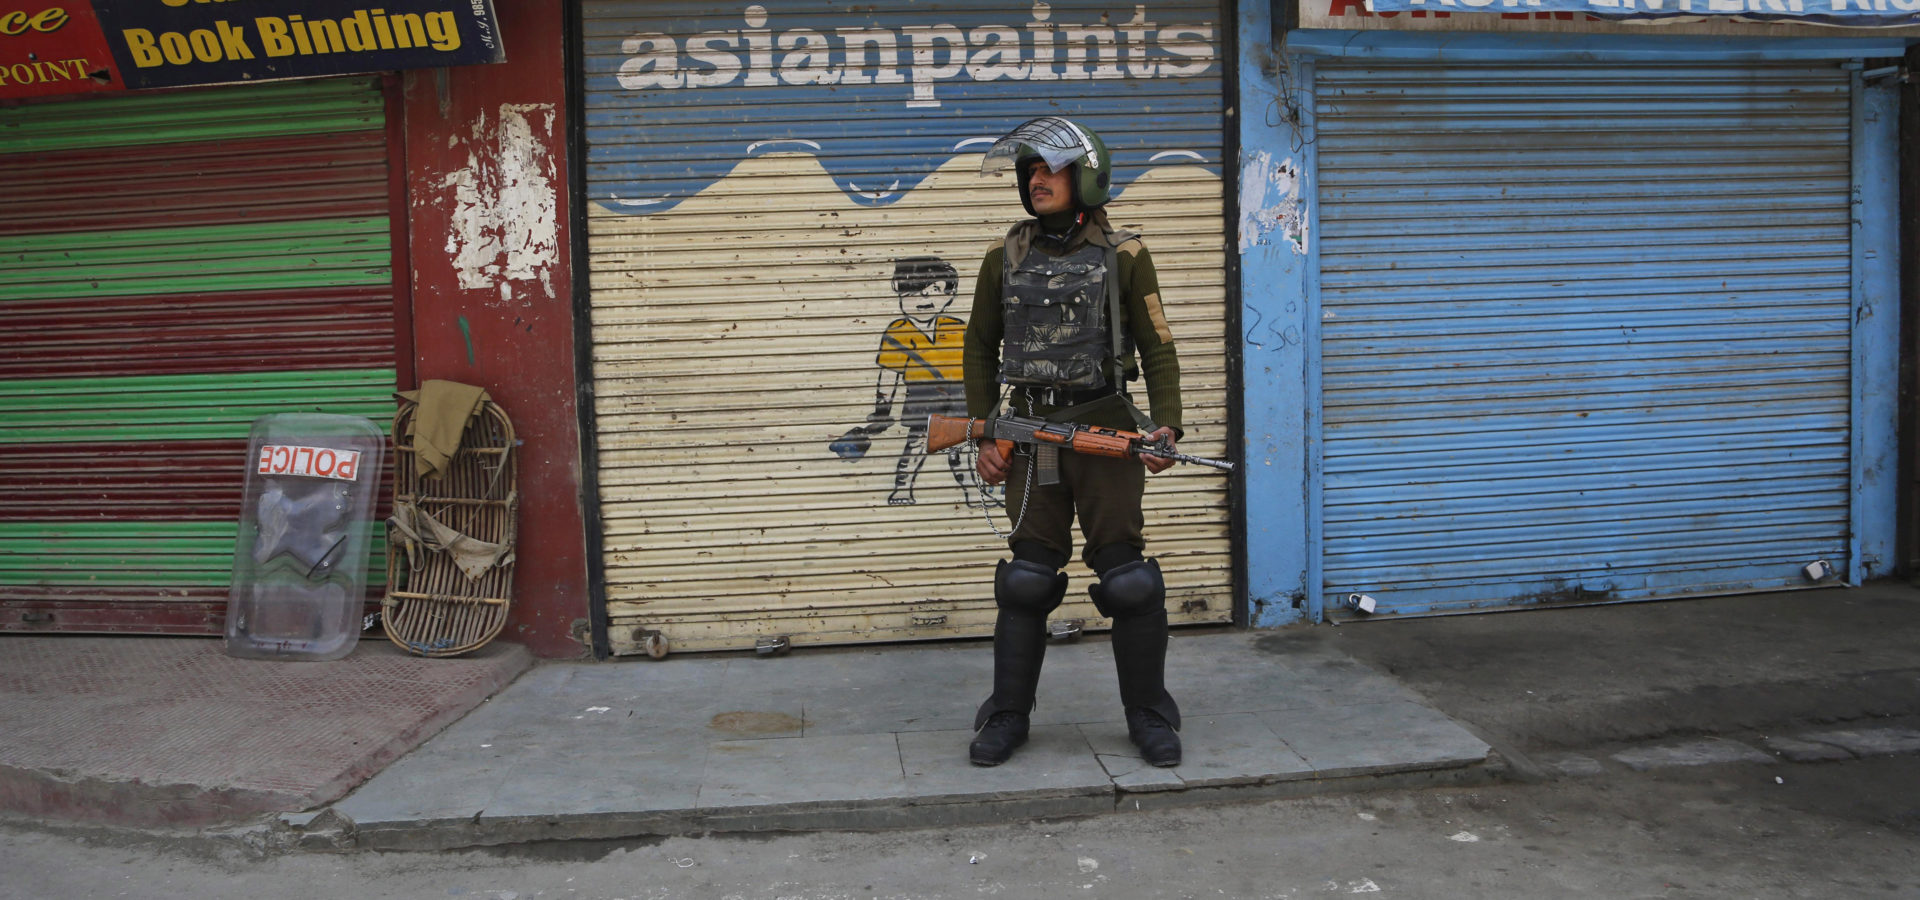 imposed by government in Srinagar, Indian controlled Kashmir, Wednesday, April 27, 2016. Government forces Wednesday imposed vehicle traffic restrictions in some parts of valley after separatists in the